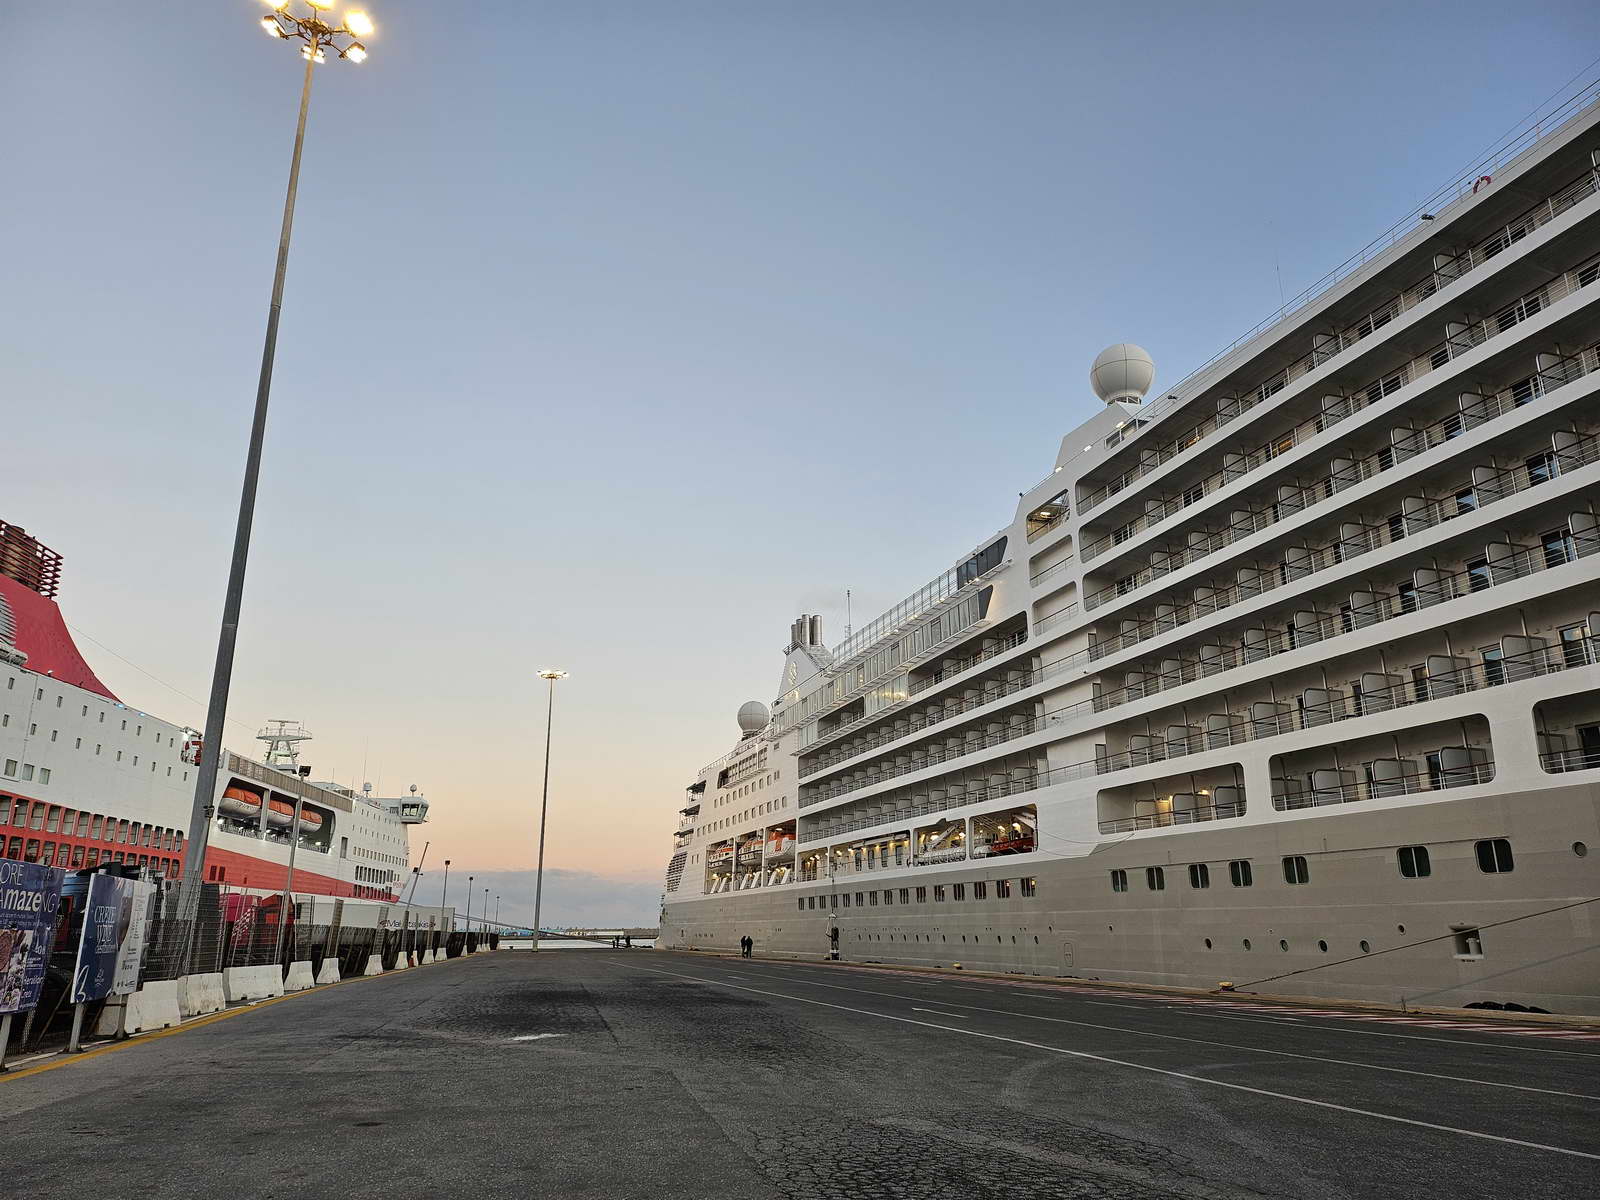 Record Cruise Ships Arrivals at Port of Heraklion in 2023